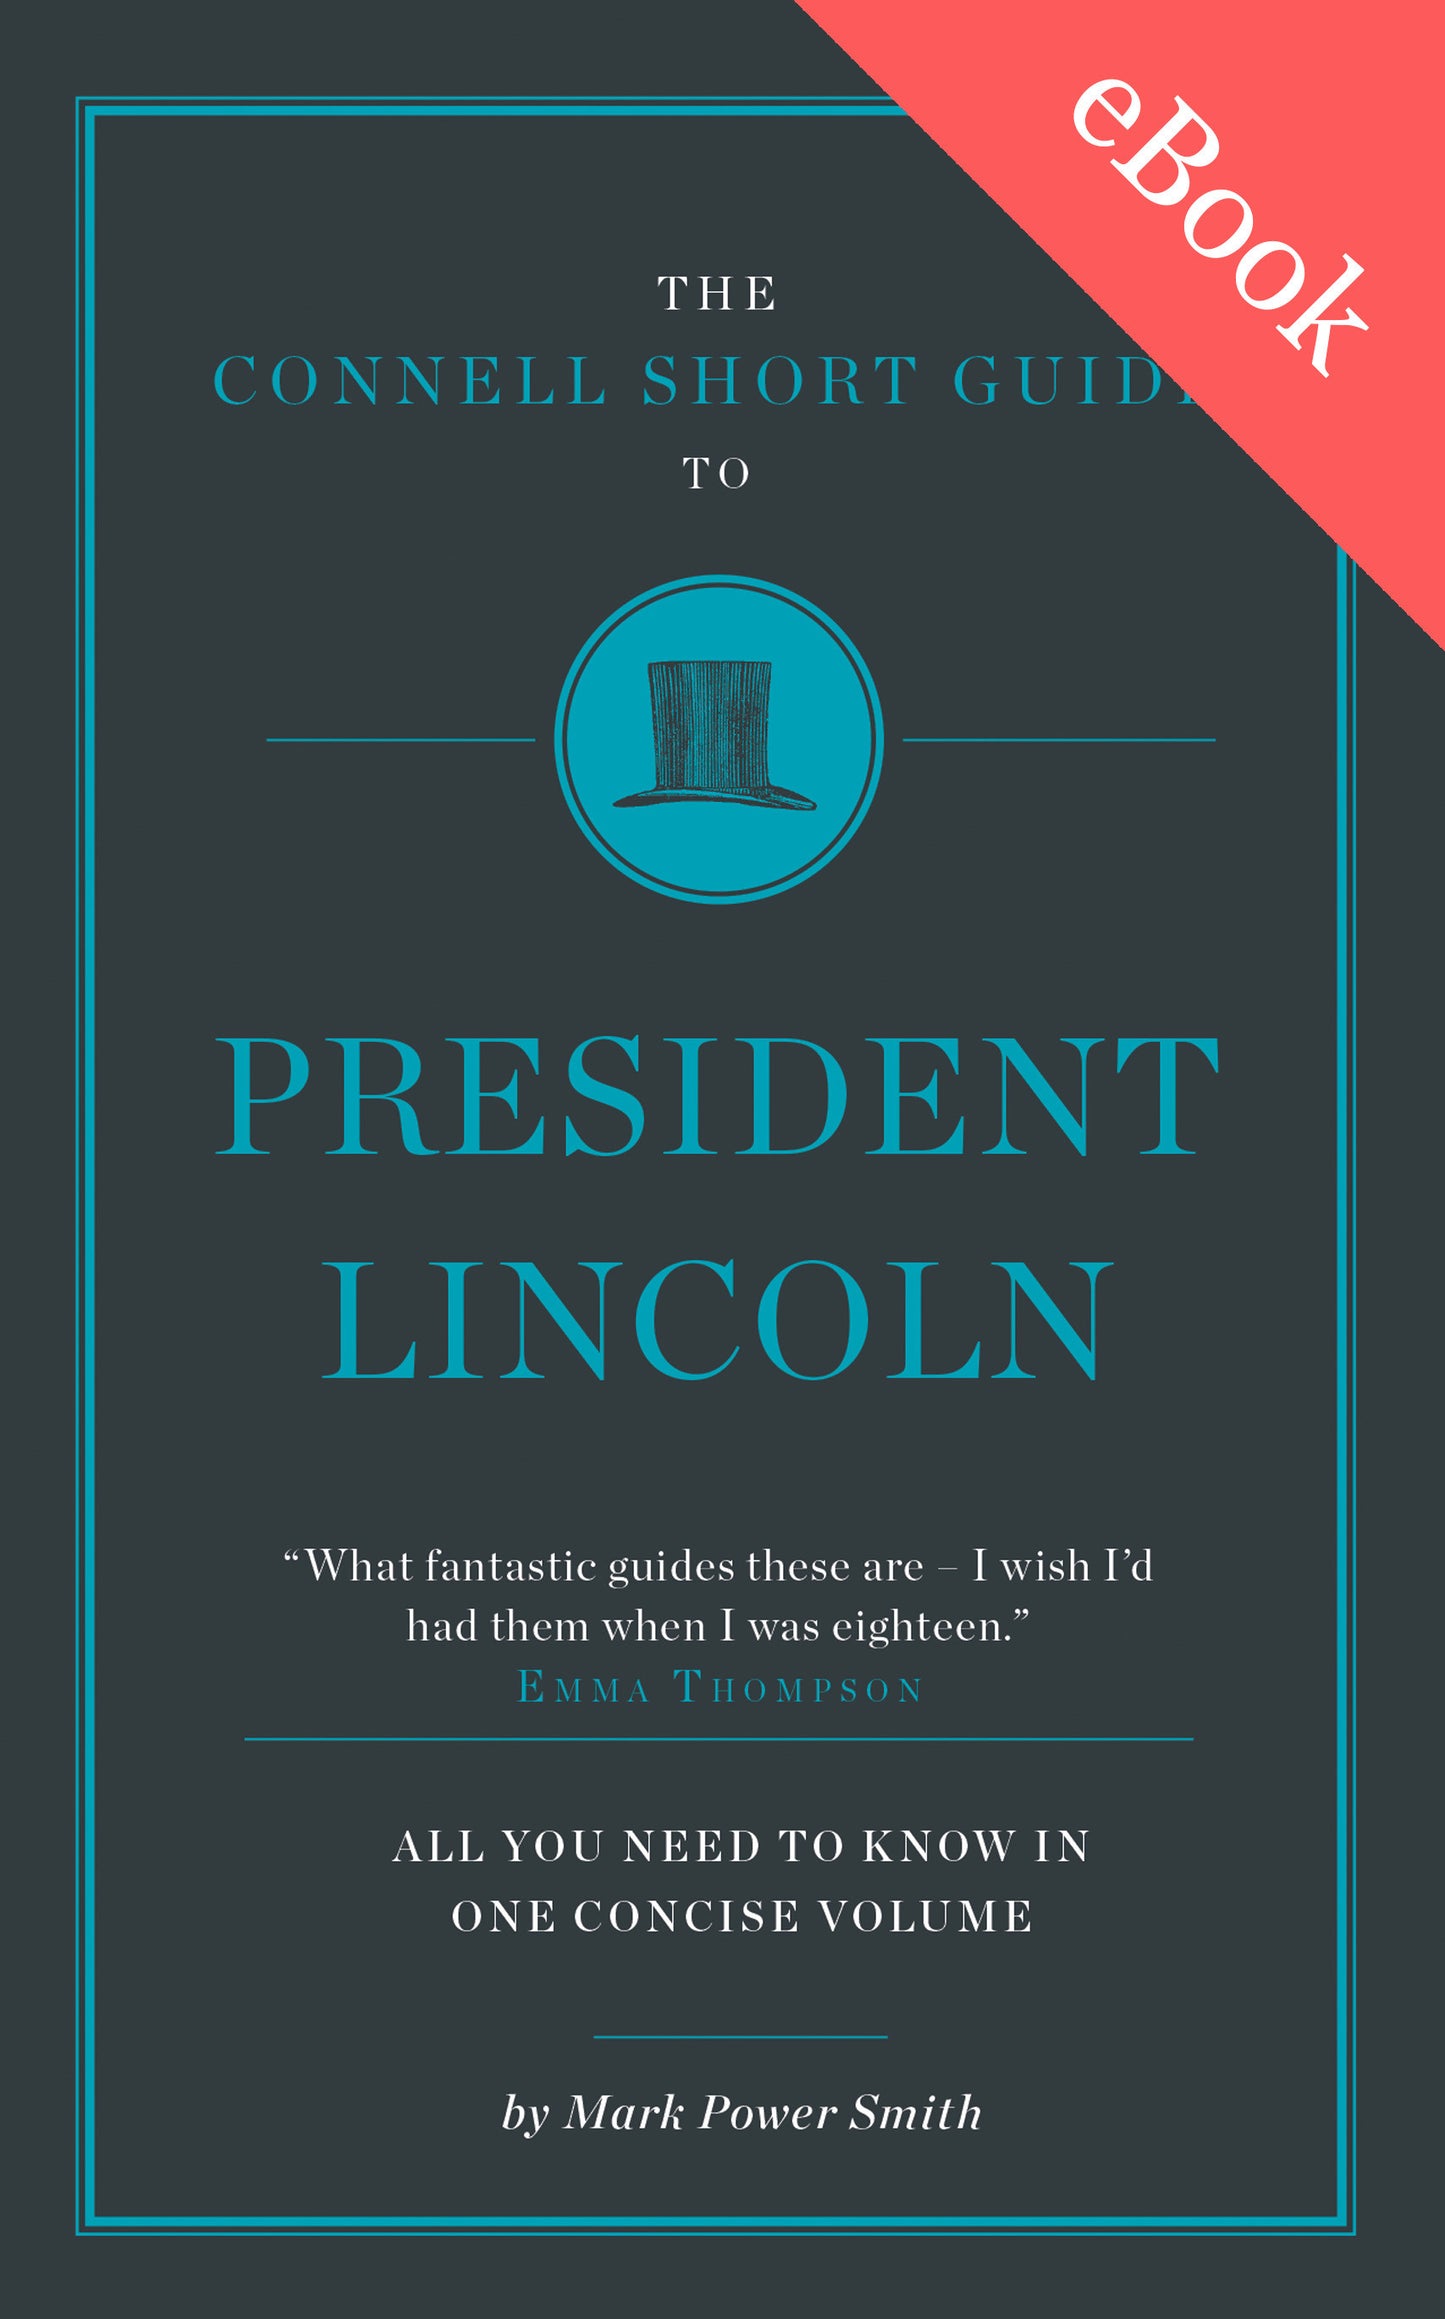 The Connell Short Guide to President Lincoln